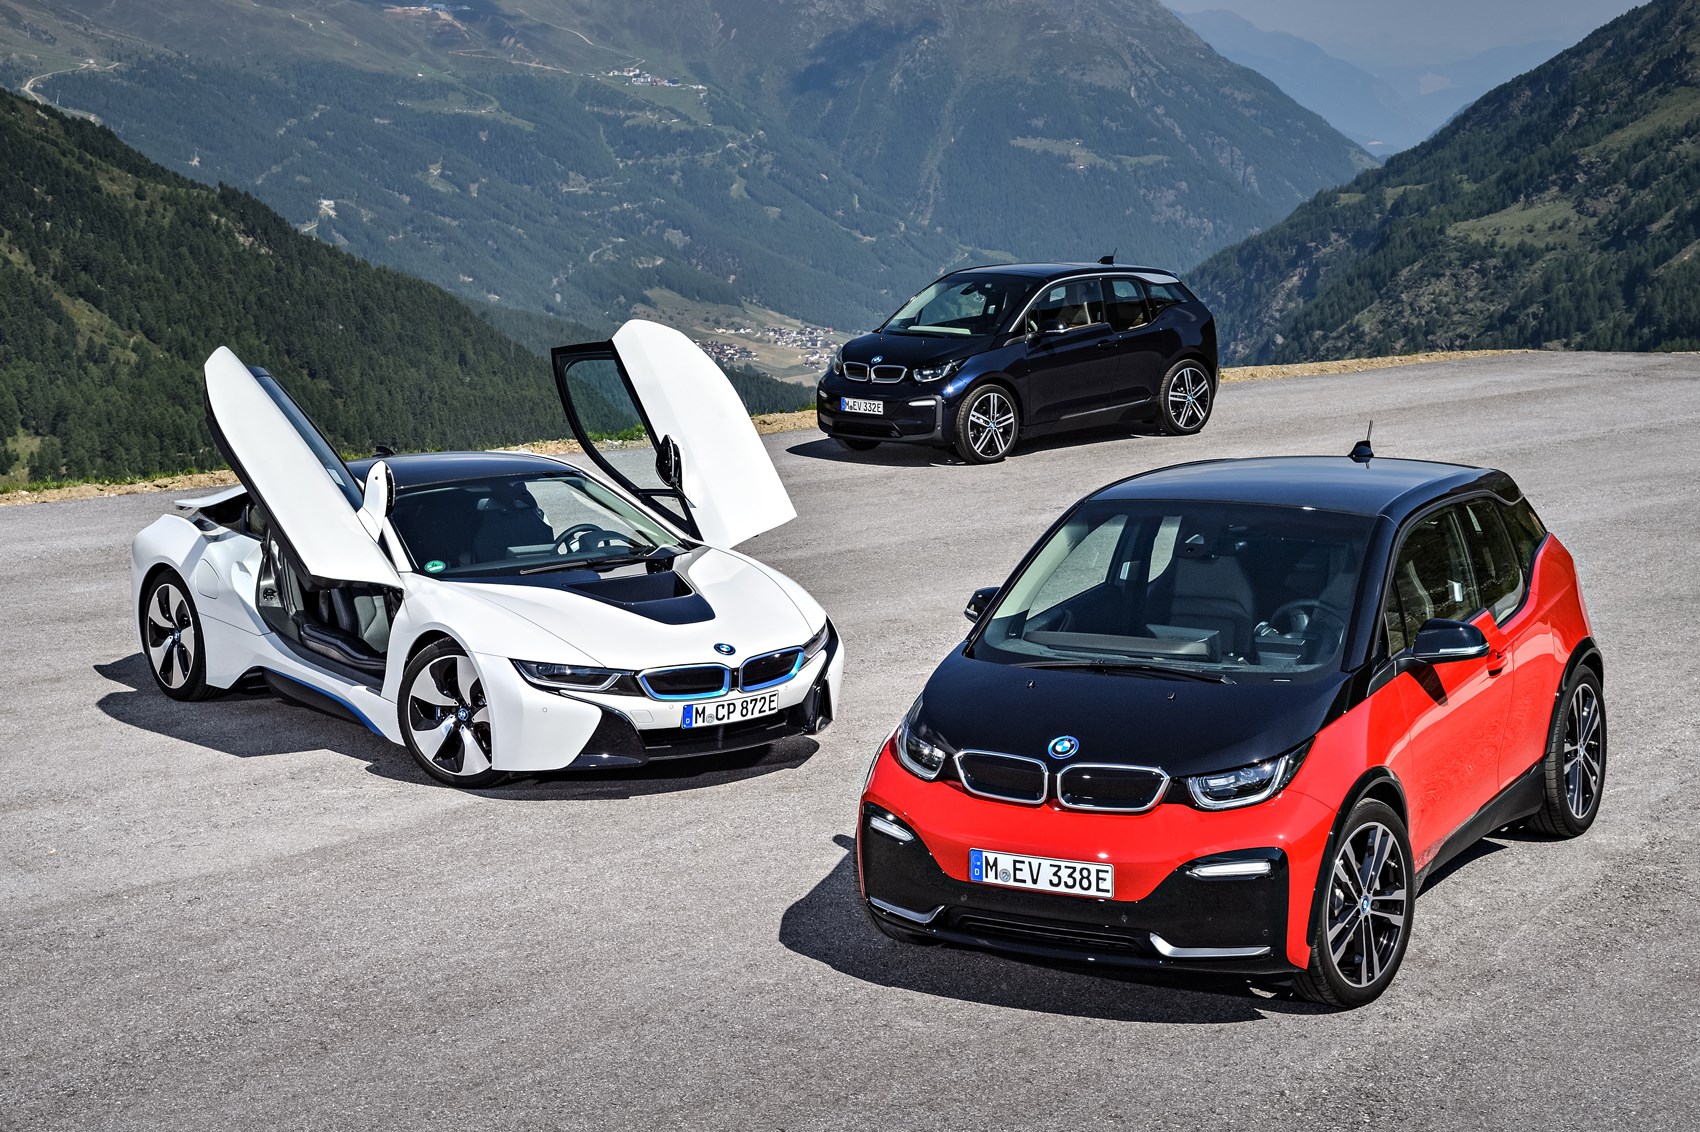 BMW aims for 20pc of vehicles to be electric by 2023 Profit by